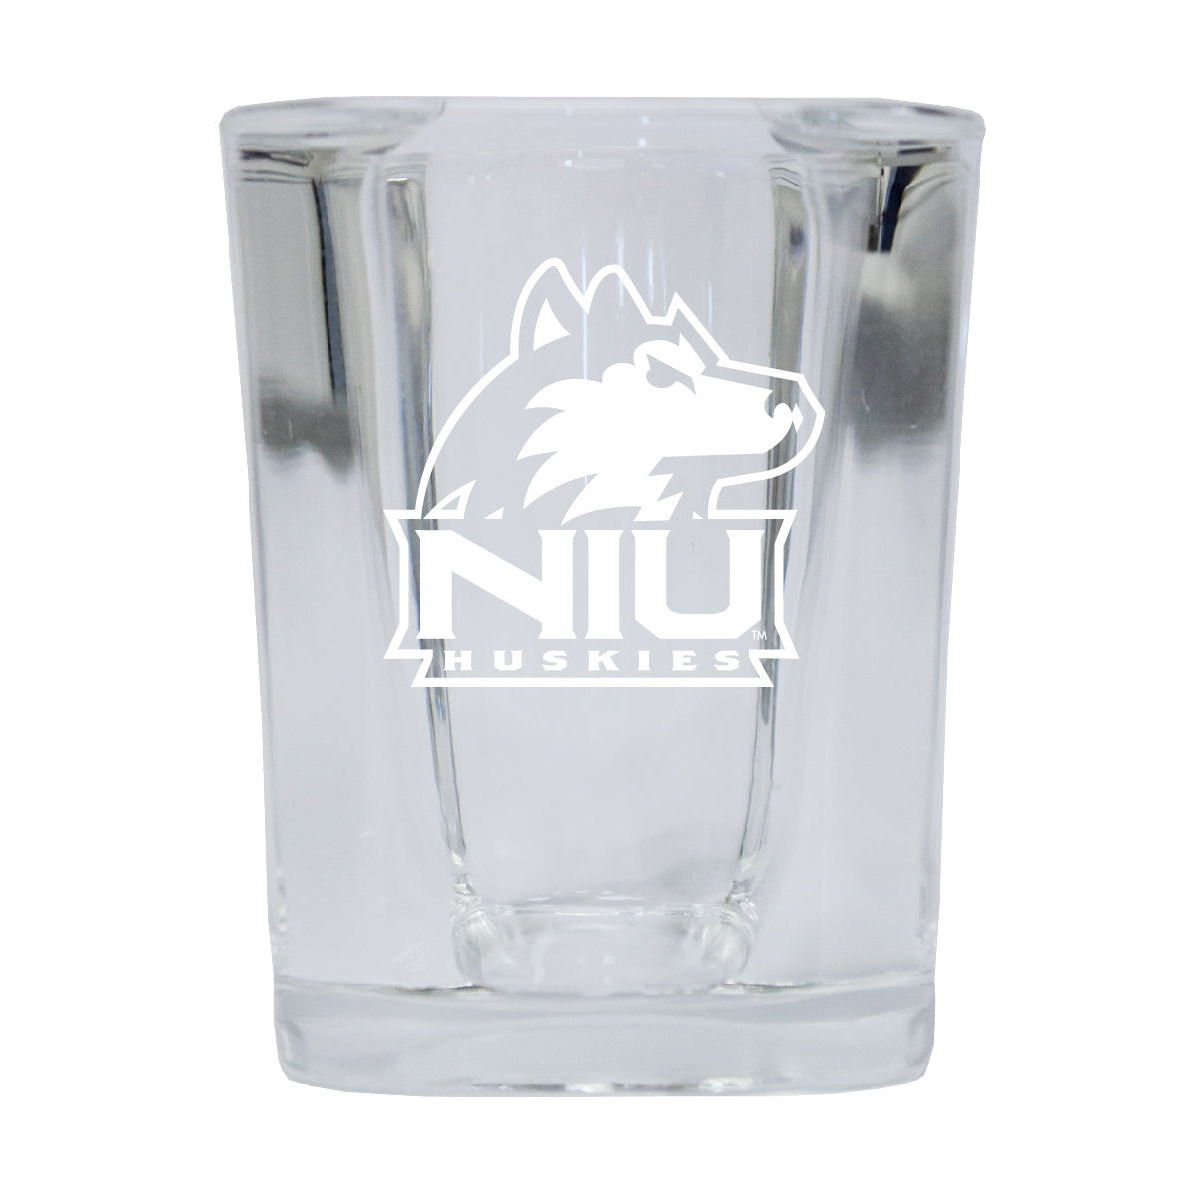 Northern Illinois Huskies 2 Ounce Square Shot Glass Laser Etched Logo Design